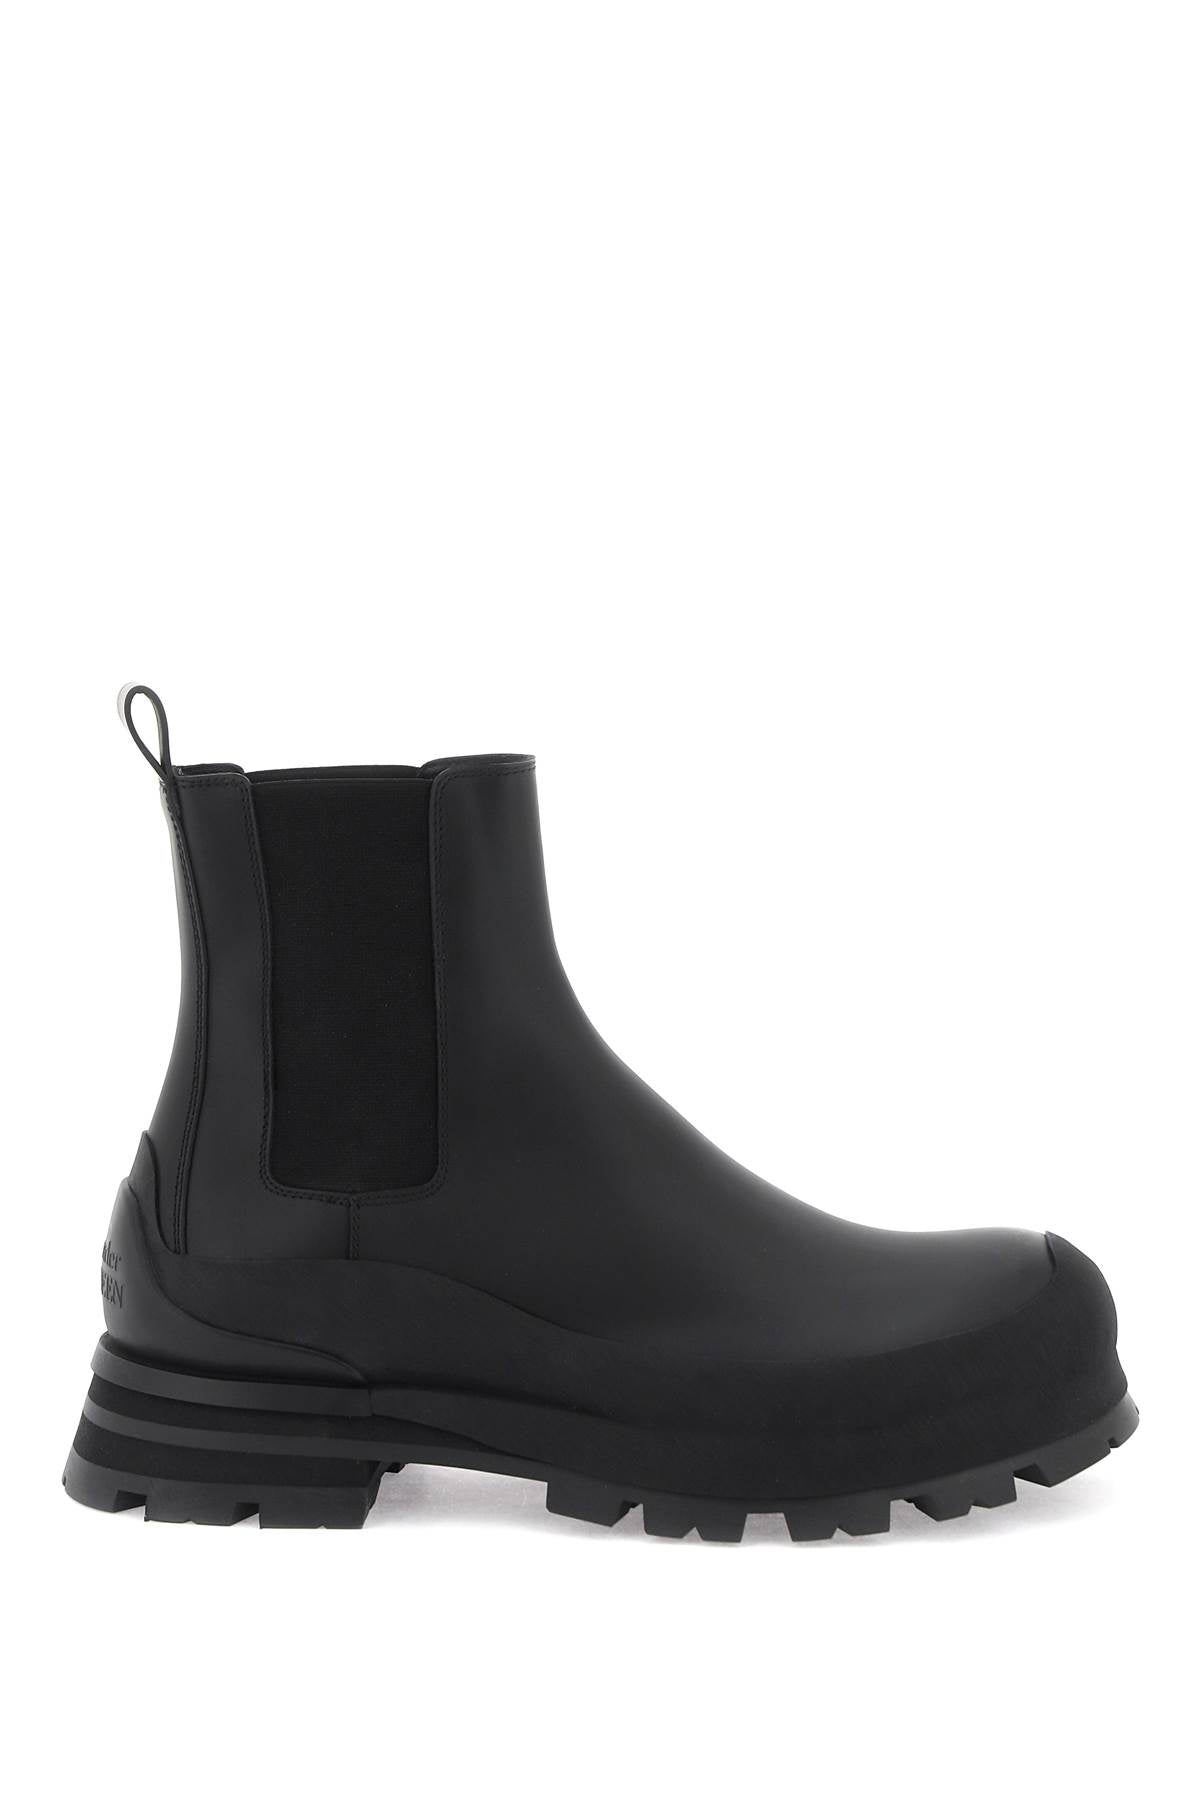 Alexander mcqueen leather chelsea ankle boots-0